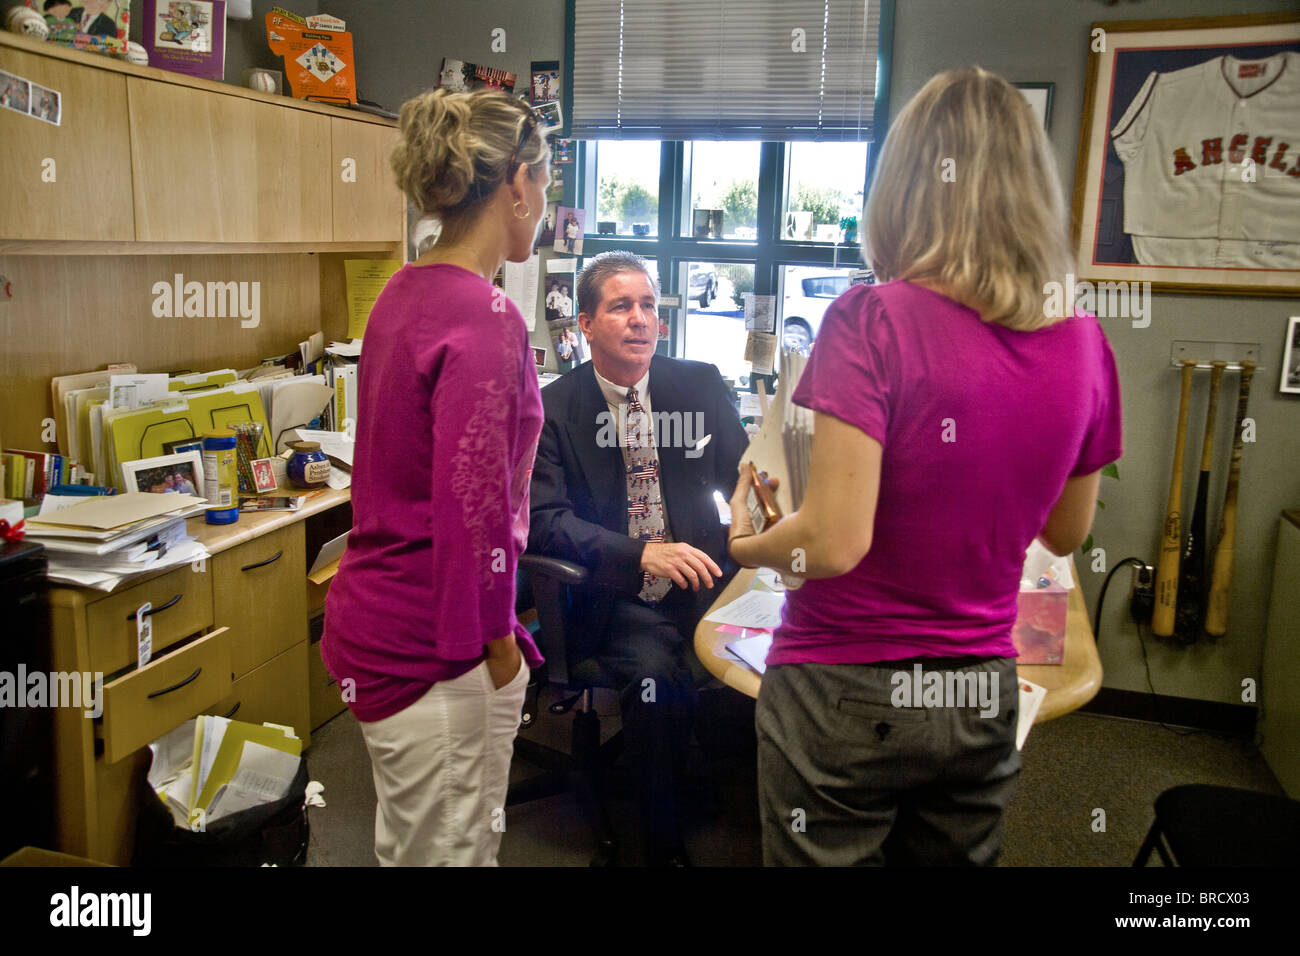 A Southern California school principal meets with two women teachers in his office. Stock Photo